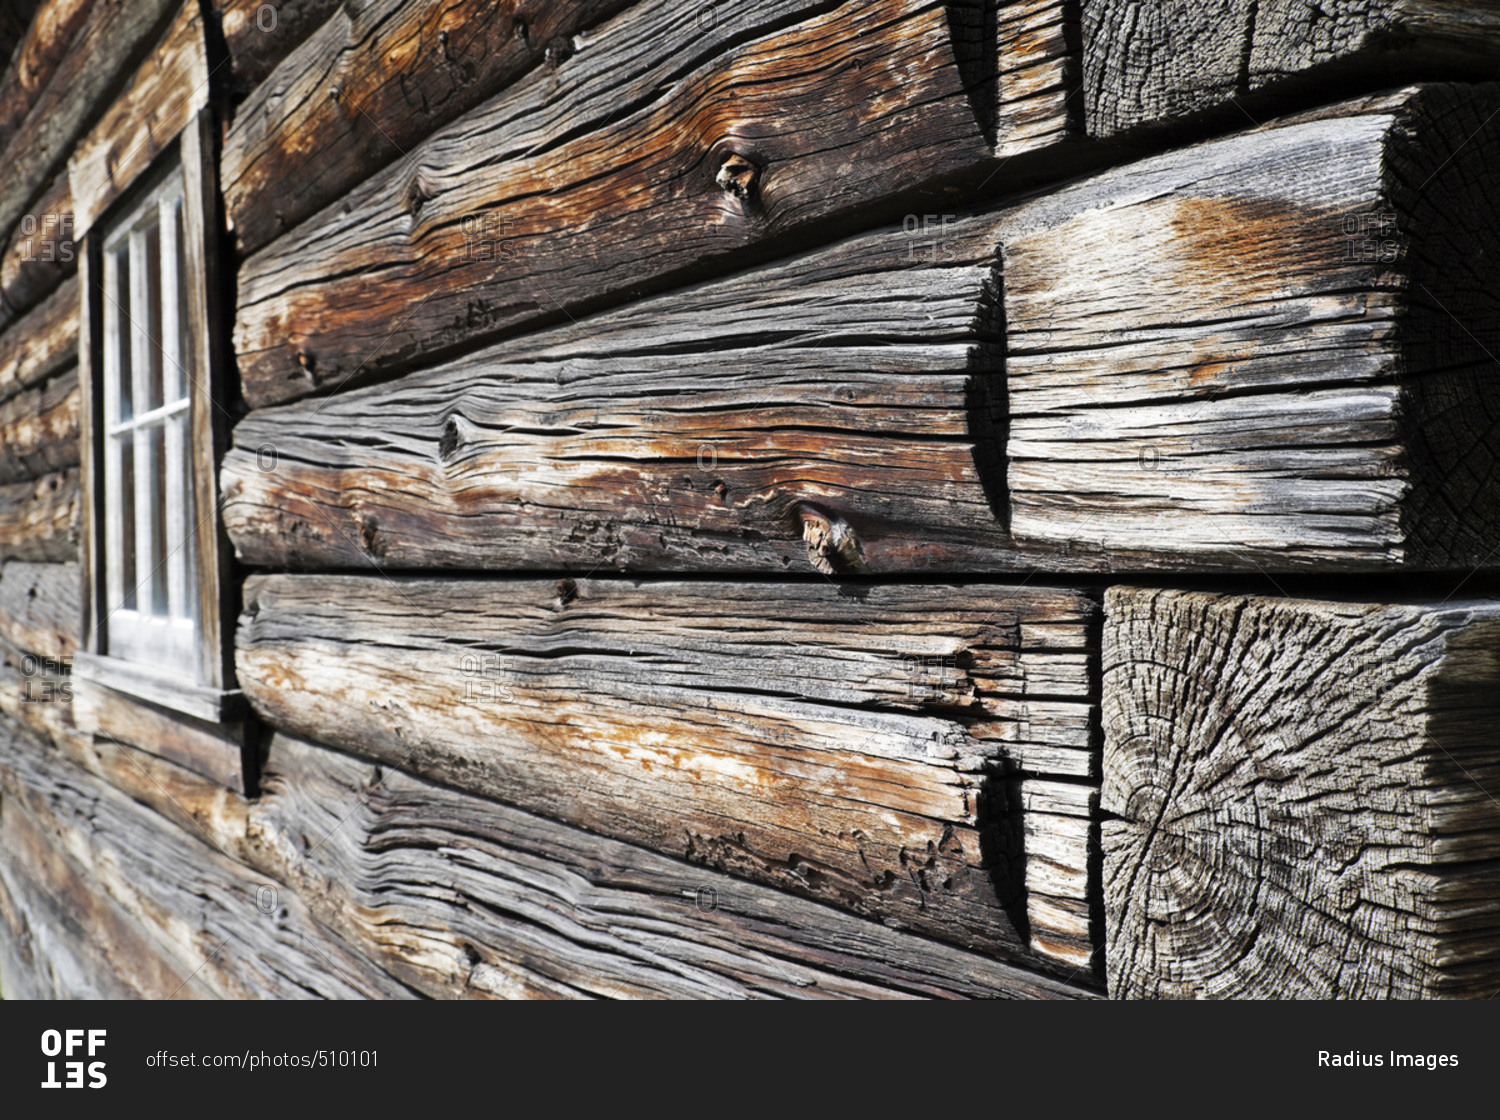 Close-up of weathered logs on traditional wooden building at Baskerville Historic Town in British Columbia, Canada